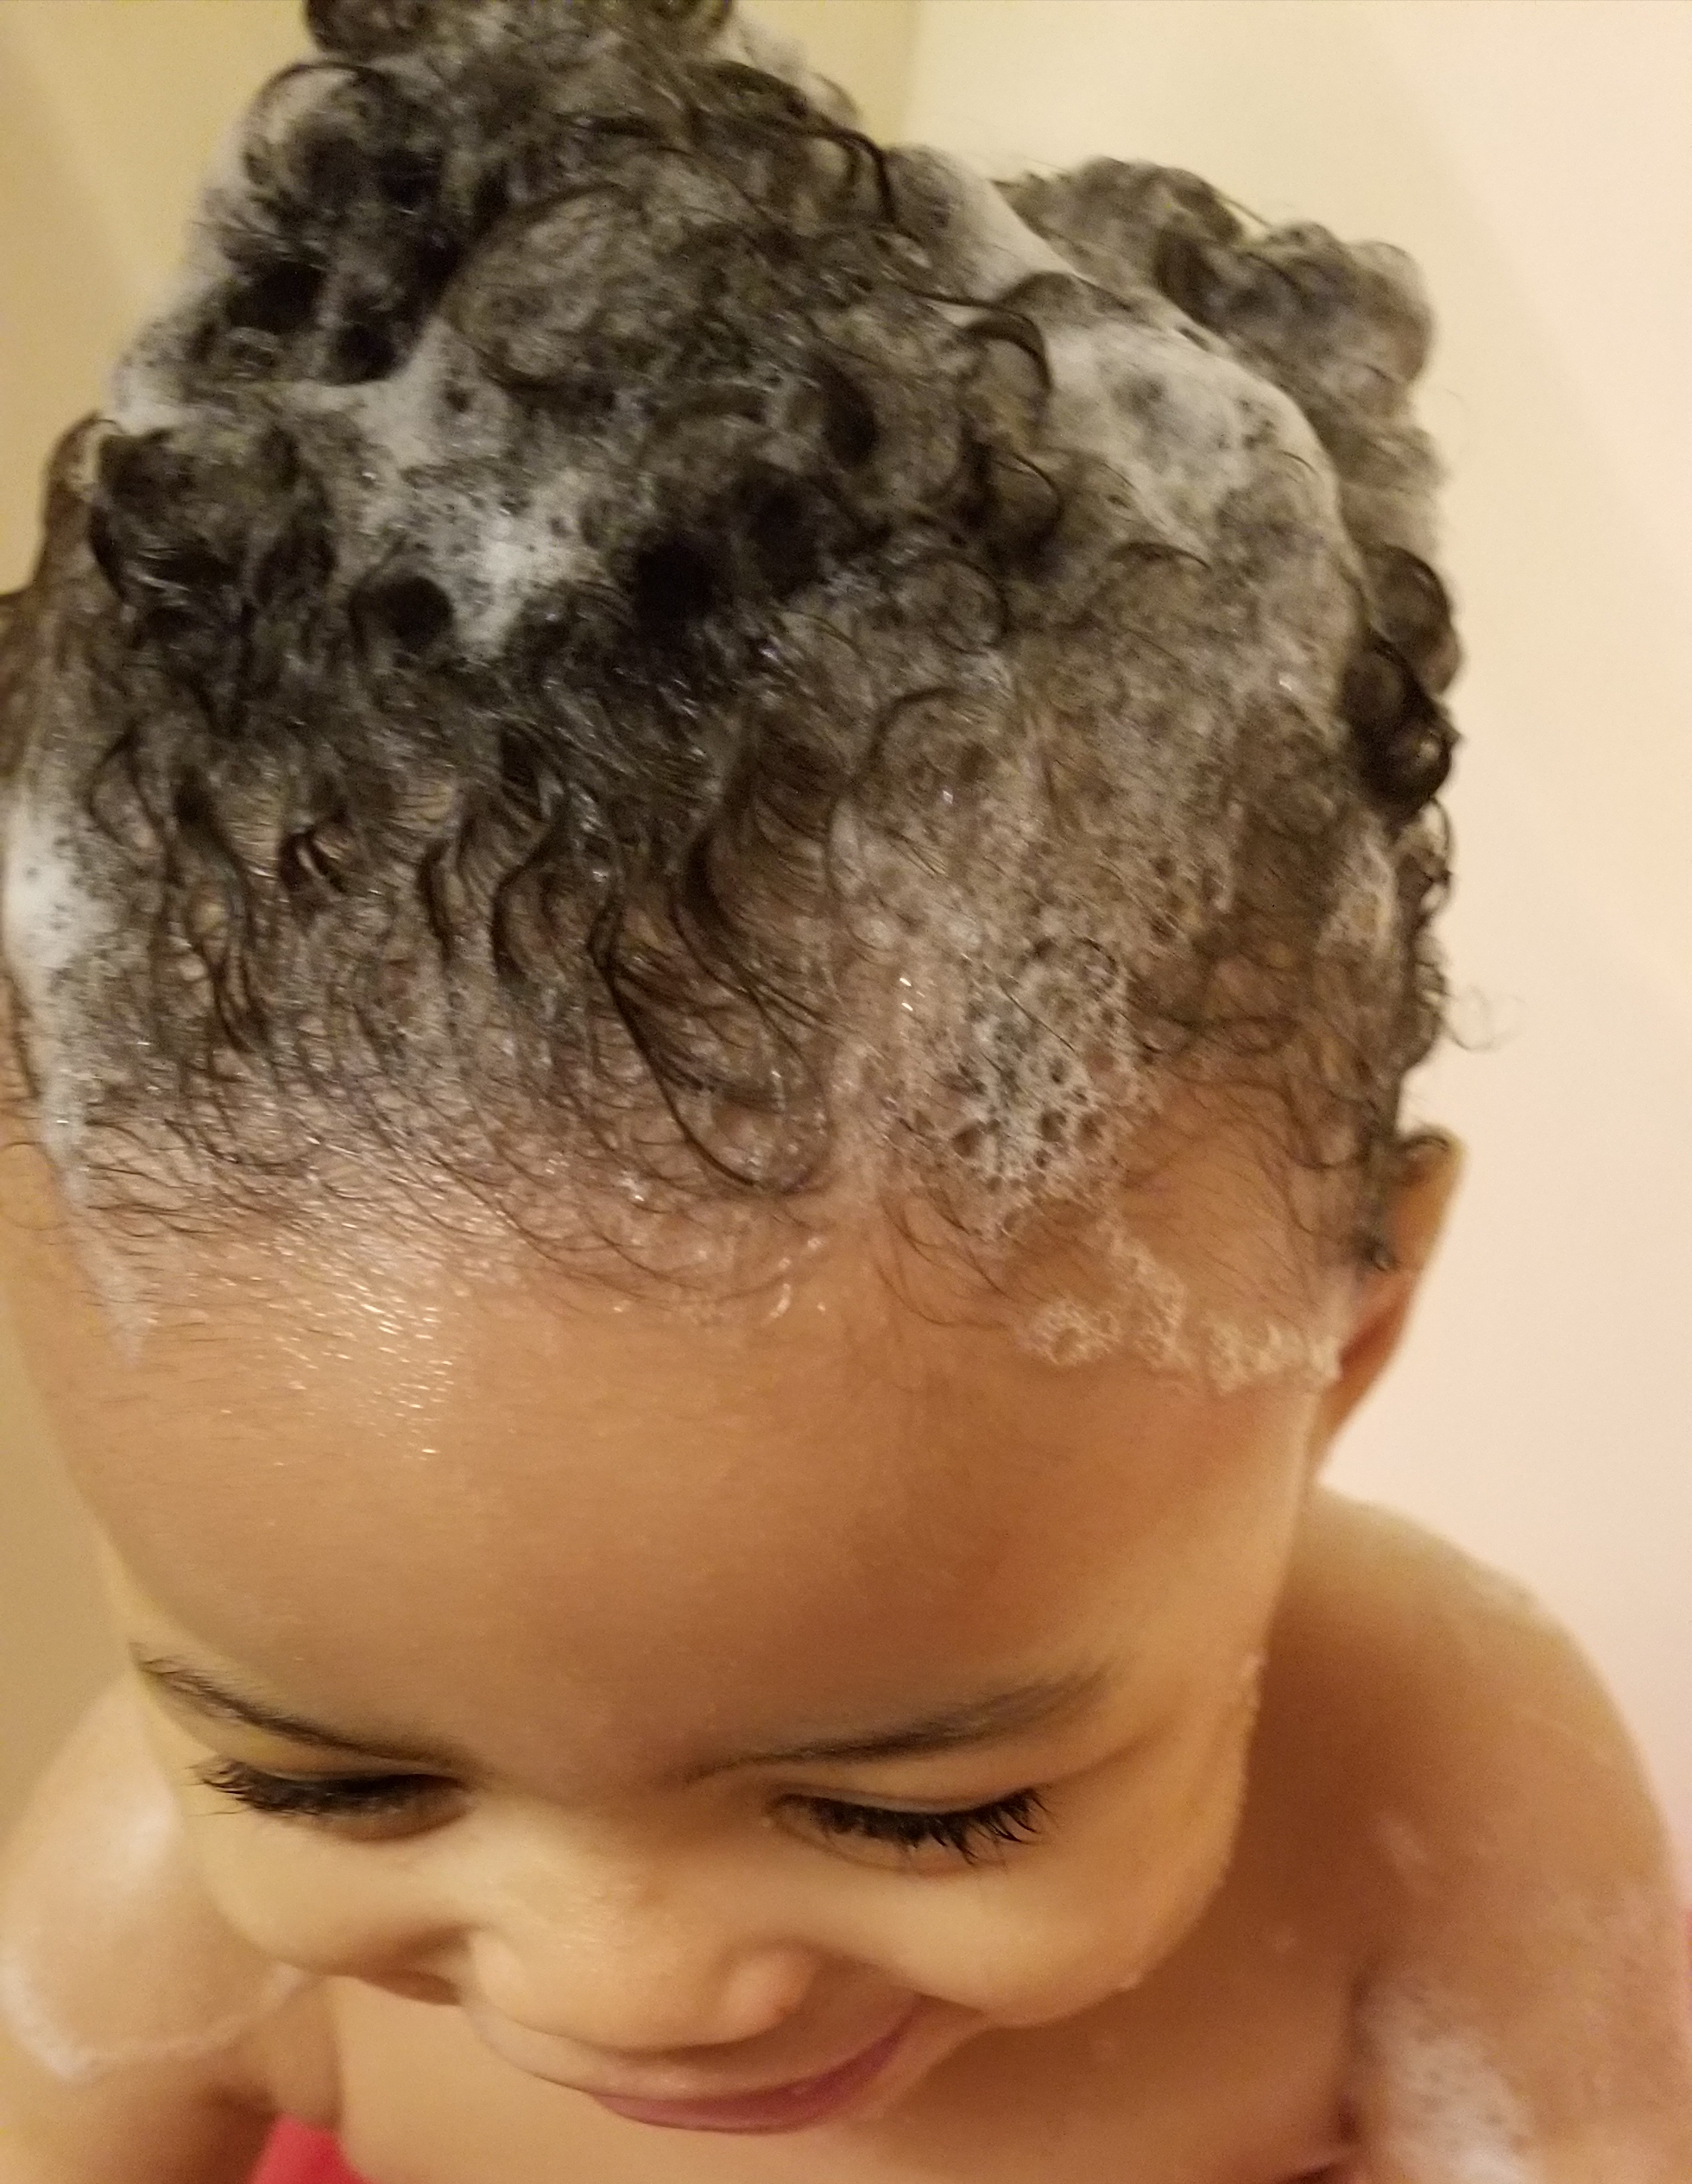 Here’s what happened when I stopped shampooing my baby’s hair